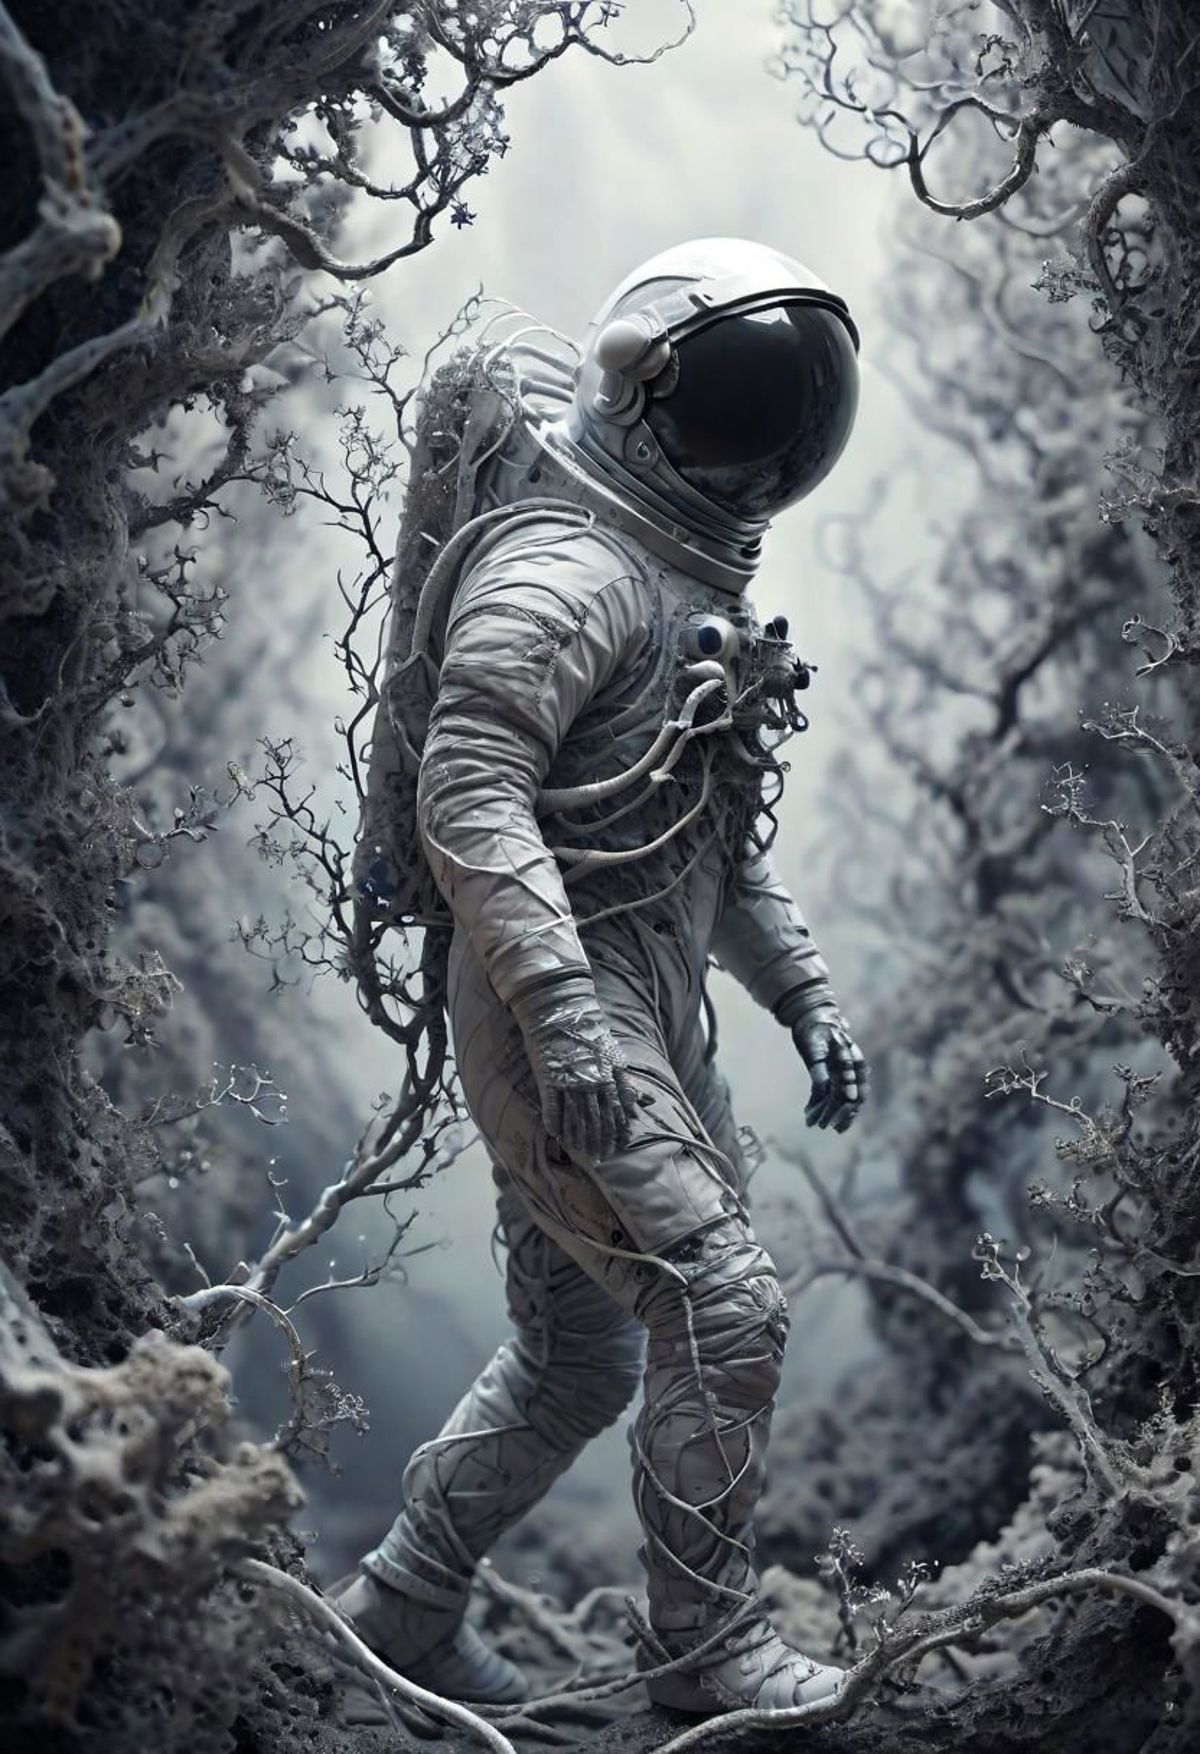 Astronaut Walking Through Trees and Branches - Astronaut's Suit and Space Helmet